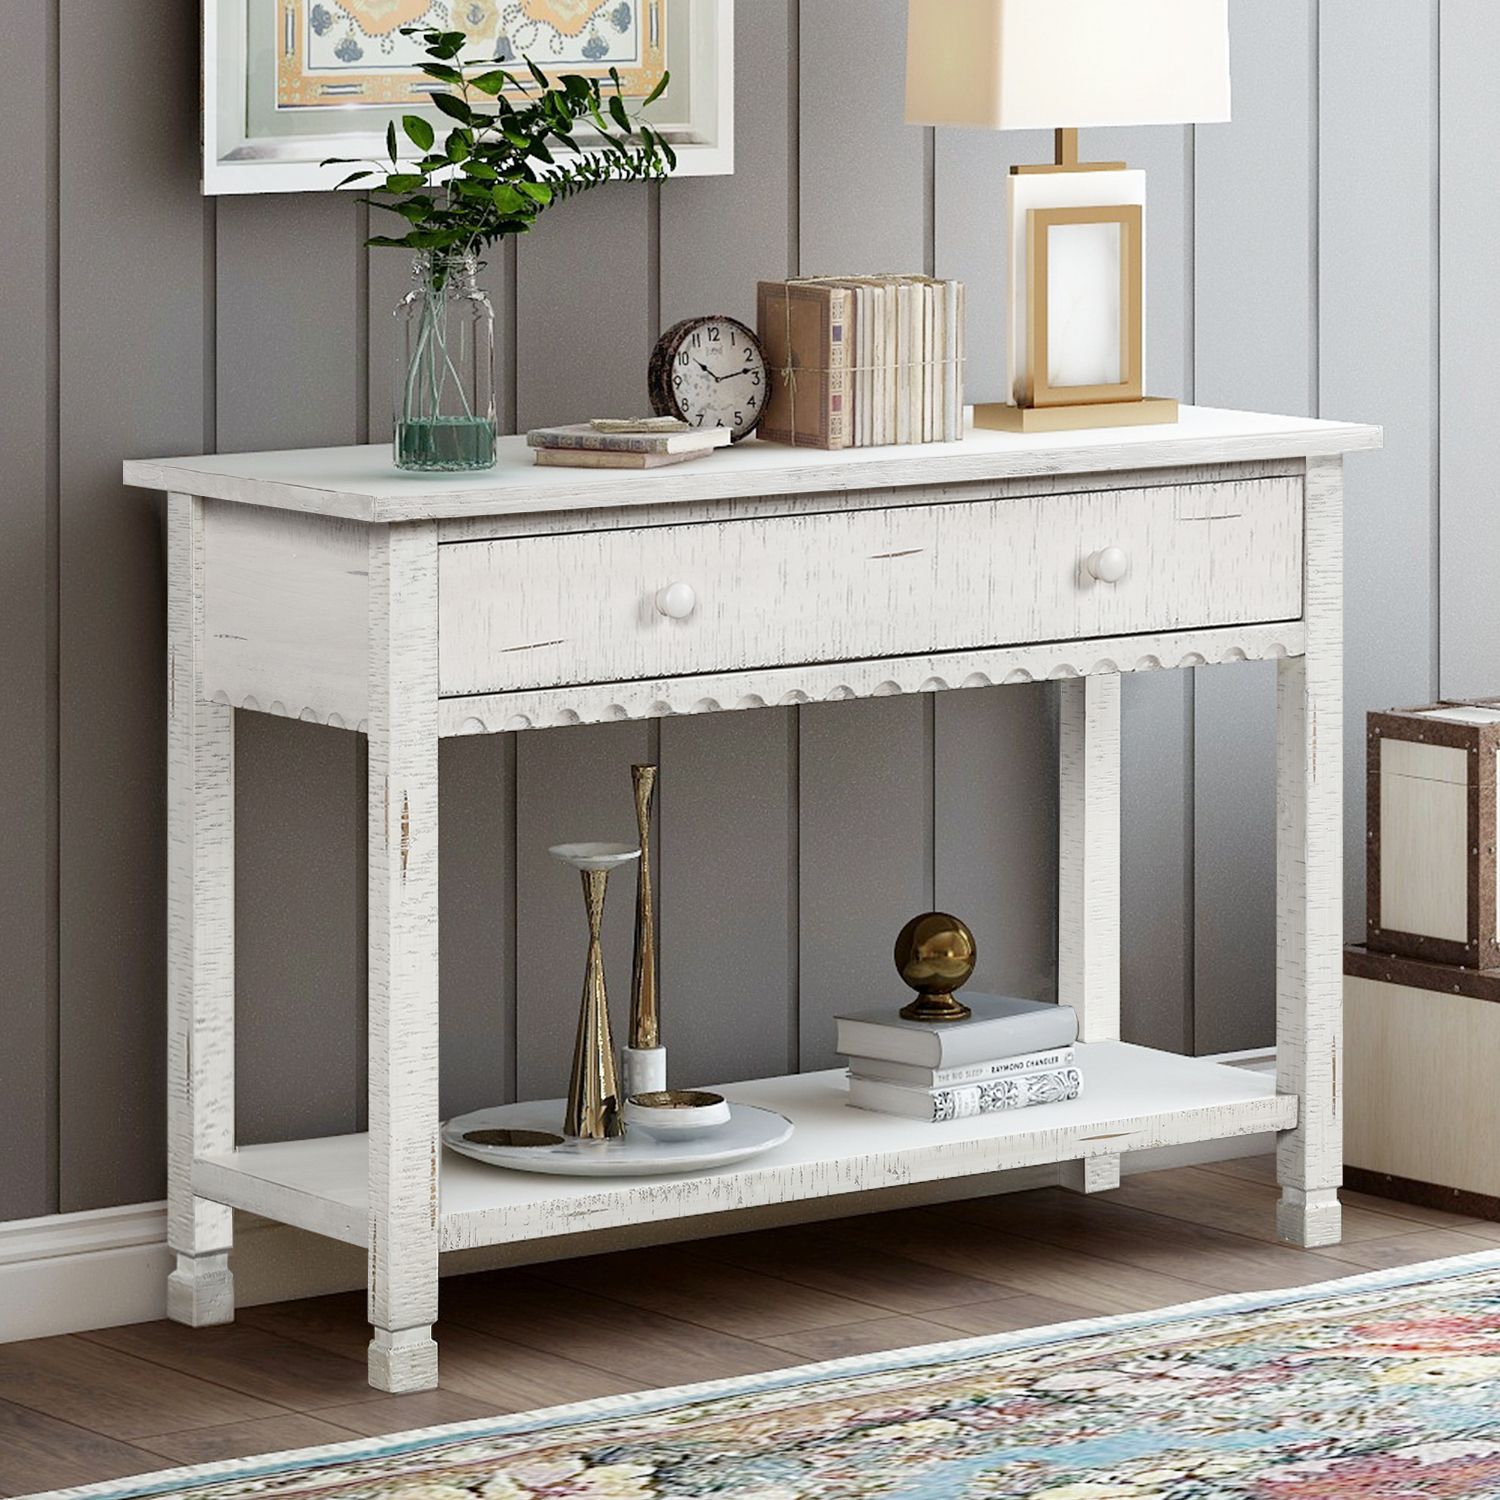 Console Sofa Table With Drawers, Btmway Wooden Rustic Within White Triangular Console Tables (View 2 of 20)